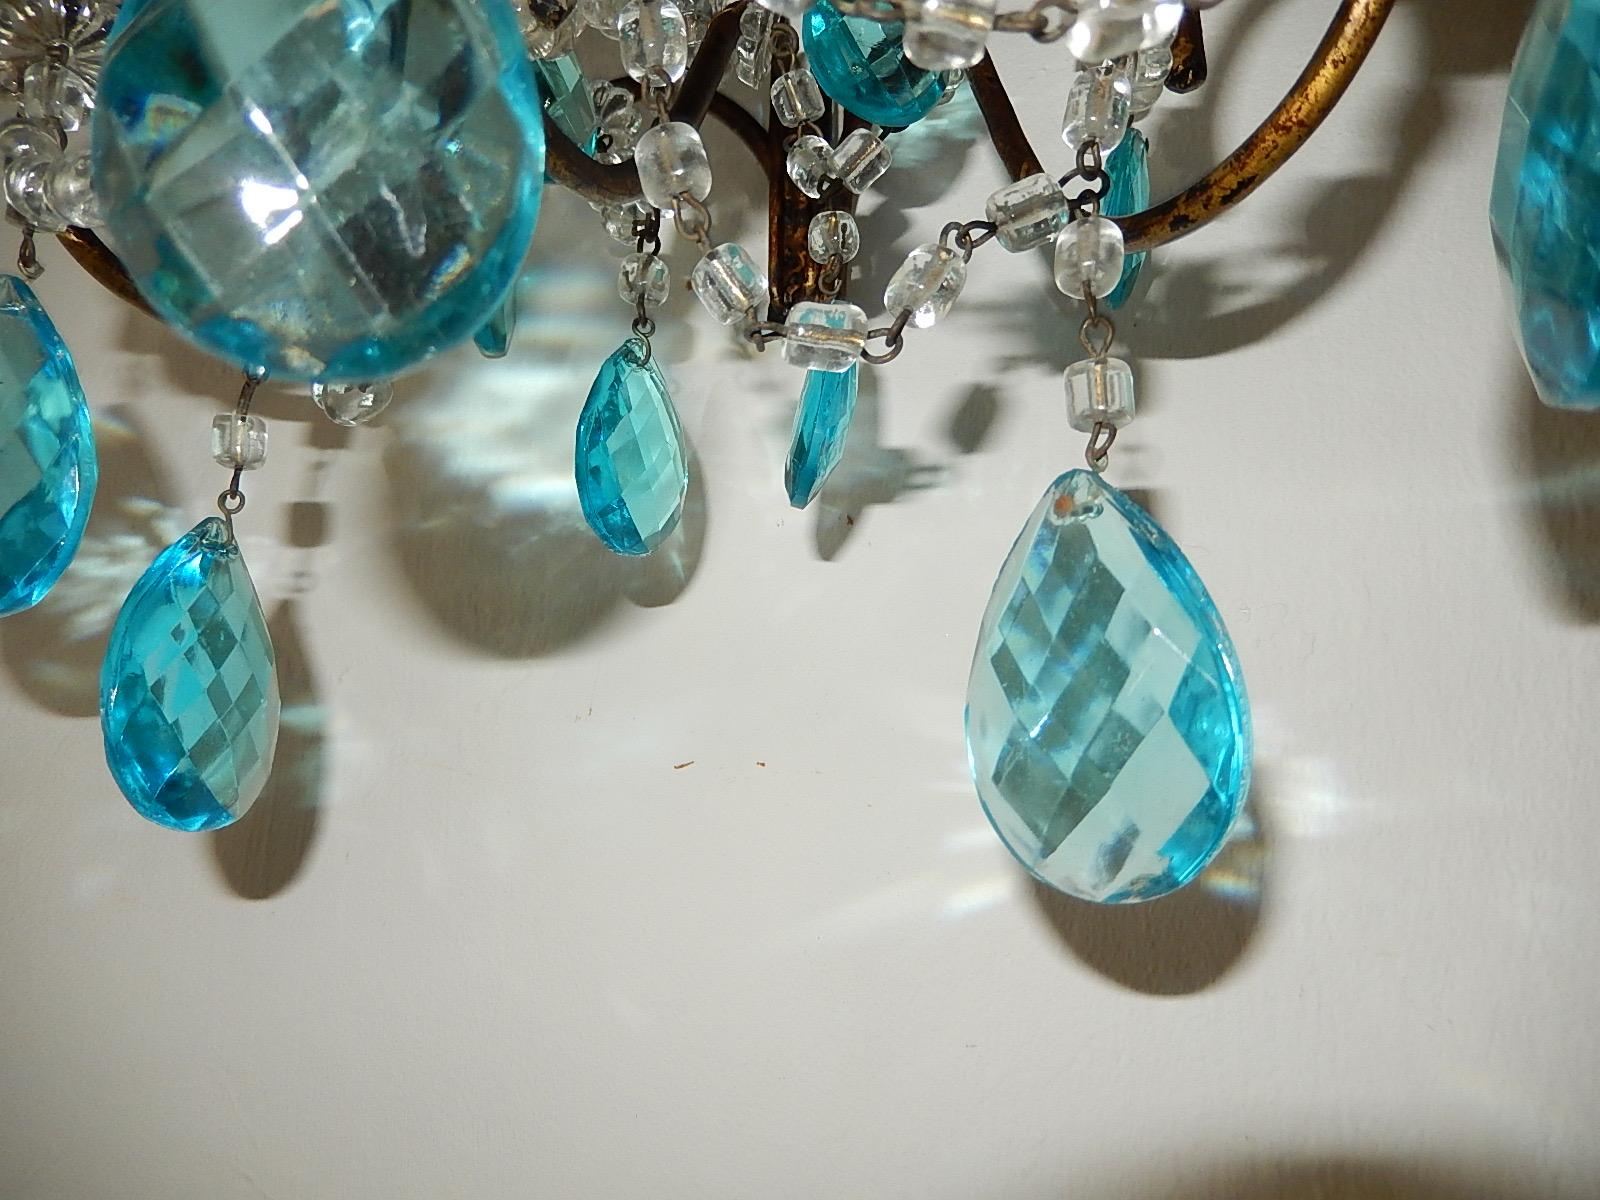 1920 French Aqua Blue Crystal Prisms and Swags Sconces For Sale 4